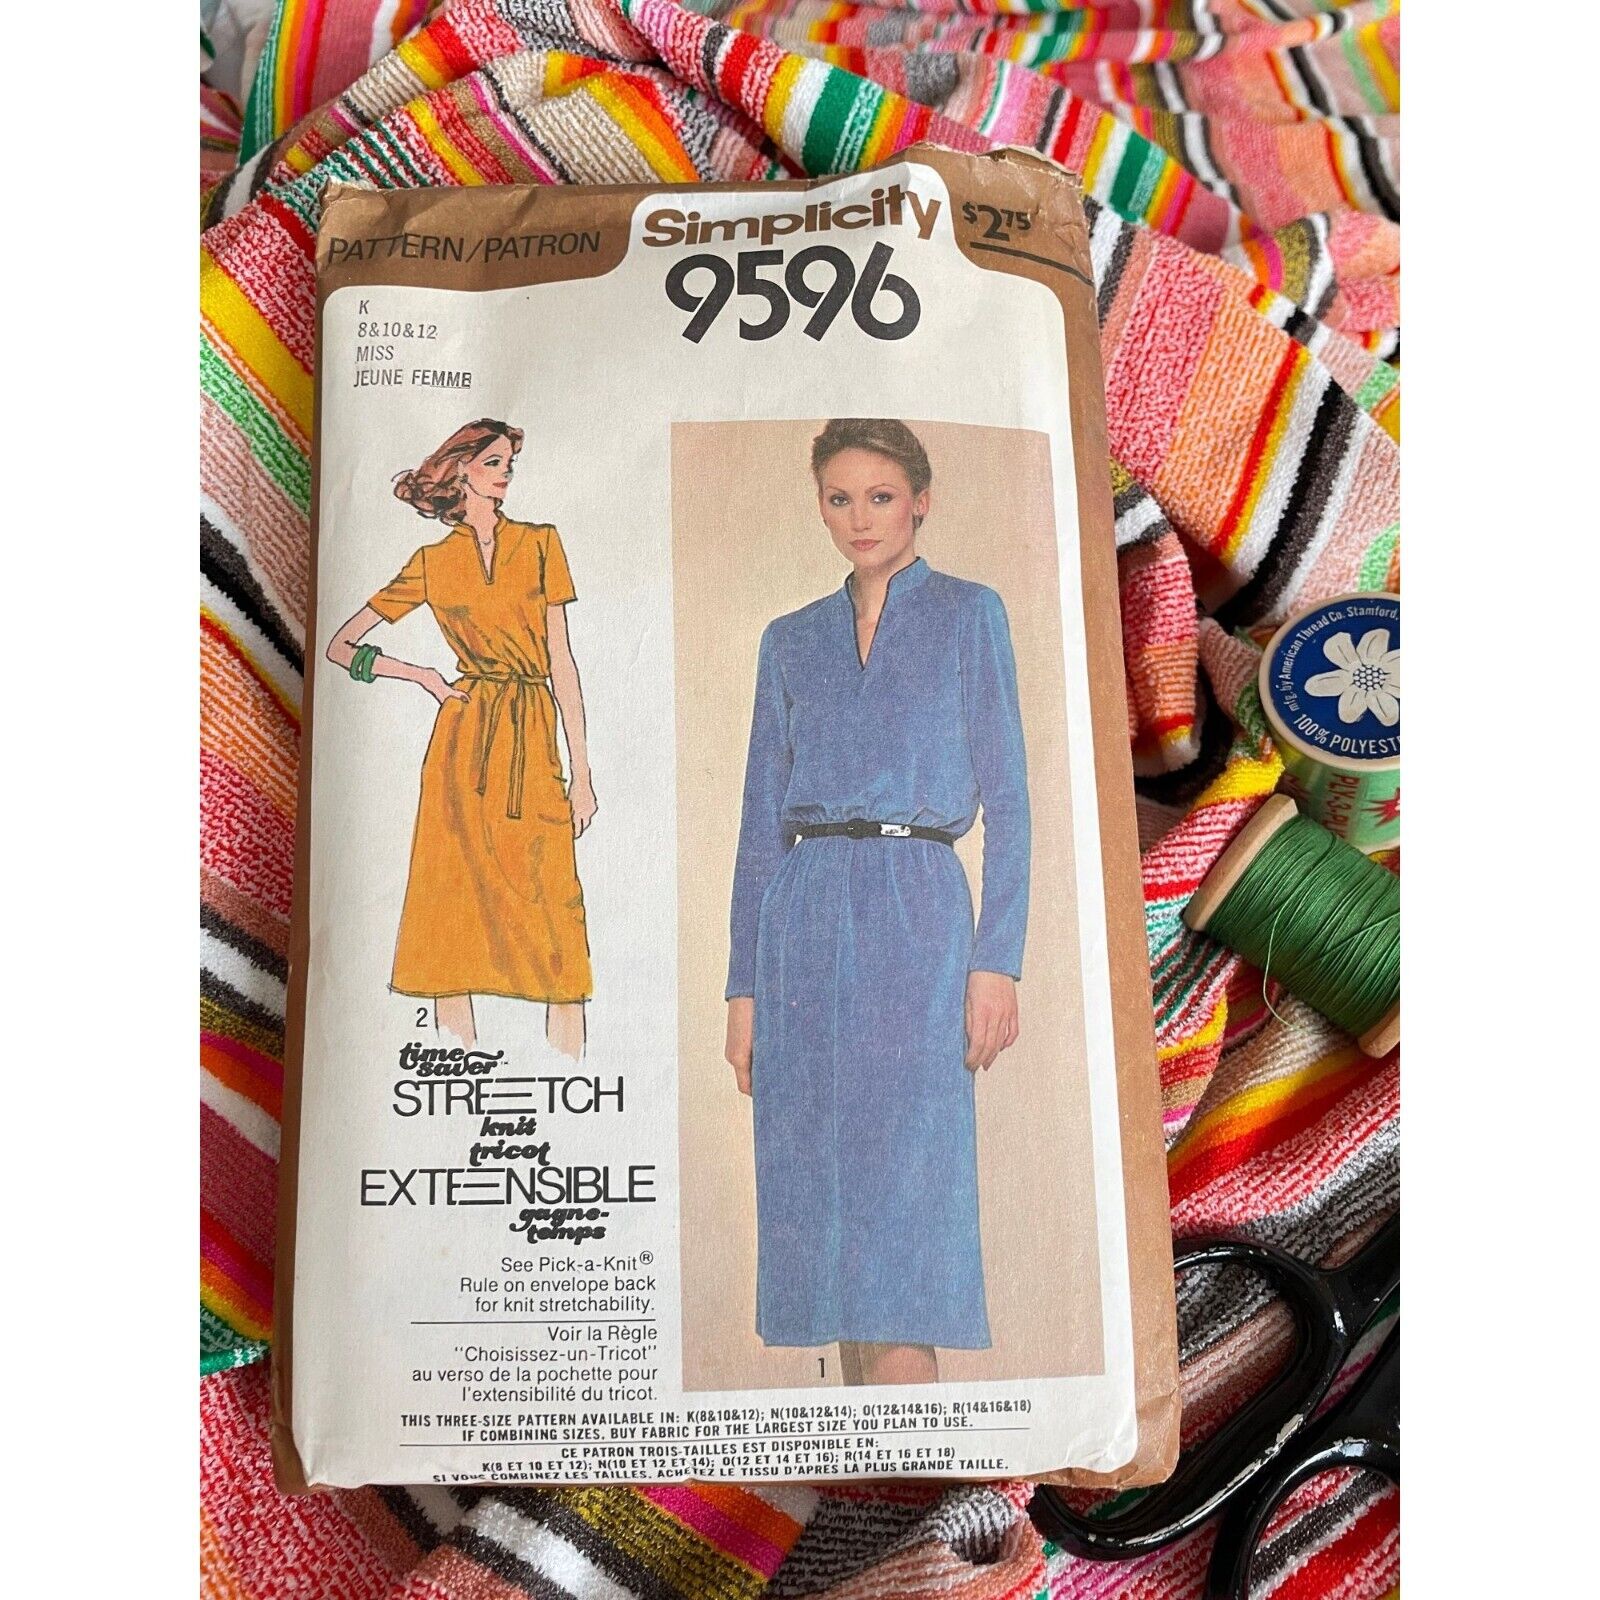 Vintage 1980s sewing pattern, Simplicity 9596, dress, Miss size 8-10-12